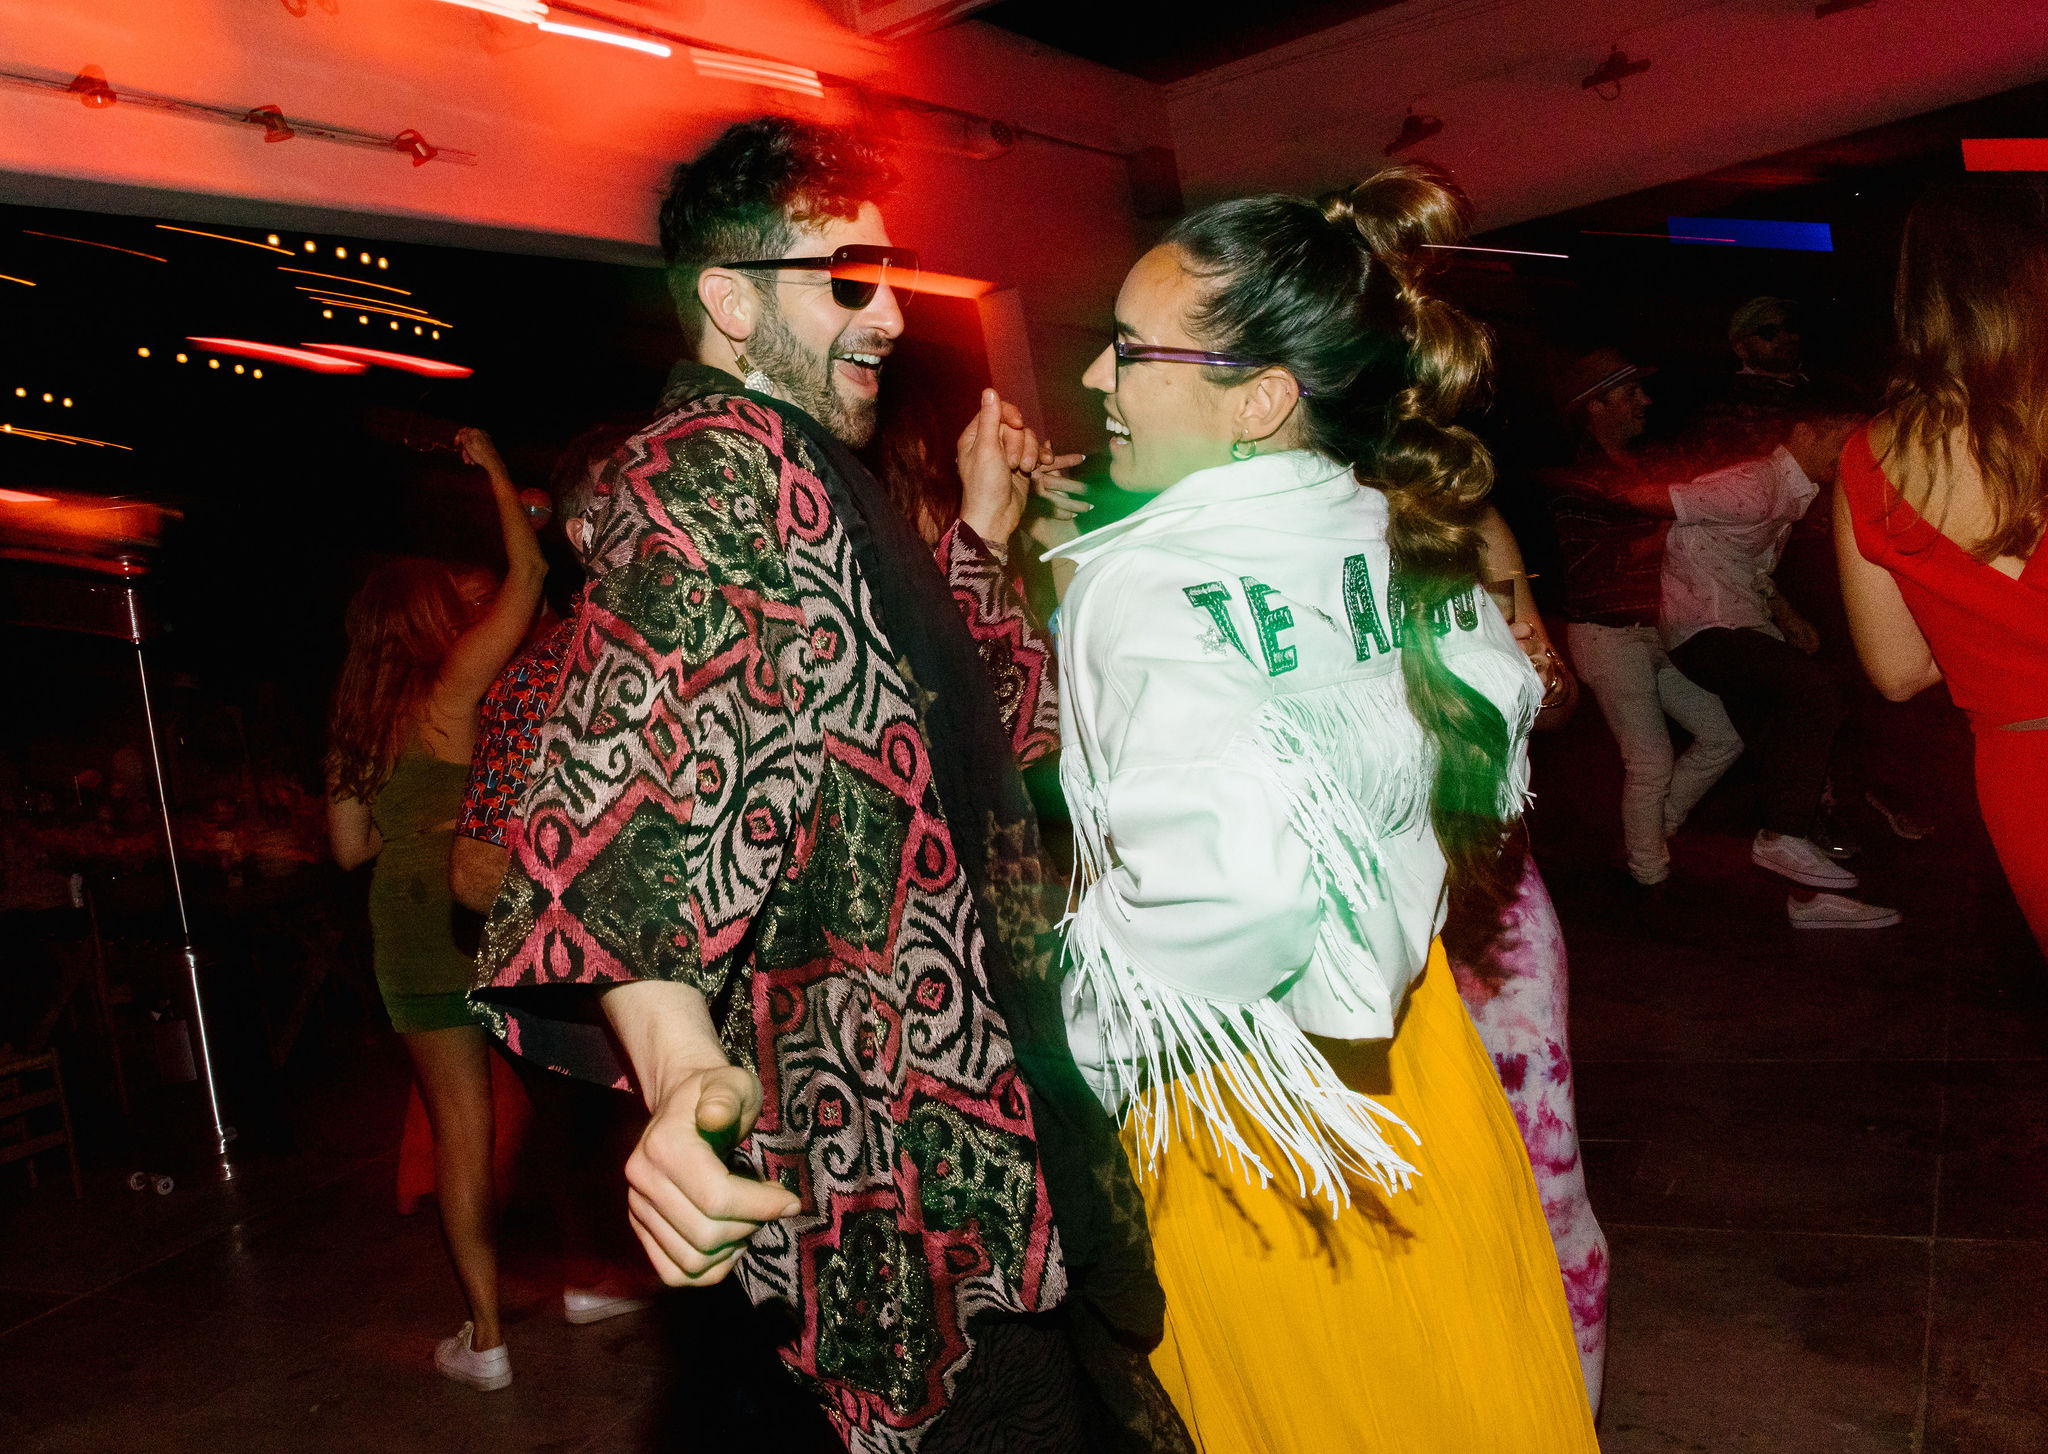 blurry photo style te amo bridal jacket with white fringe yellow after party dress high bubble pony tail man with pink and green colorful cloack. dance party